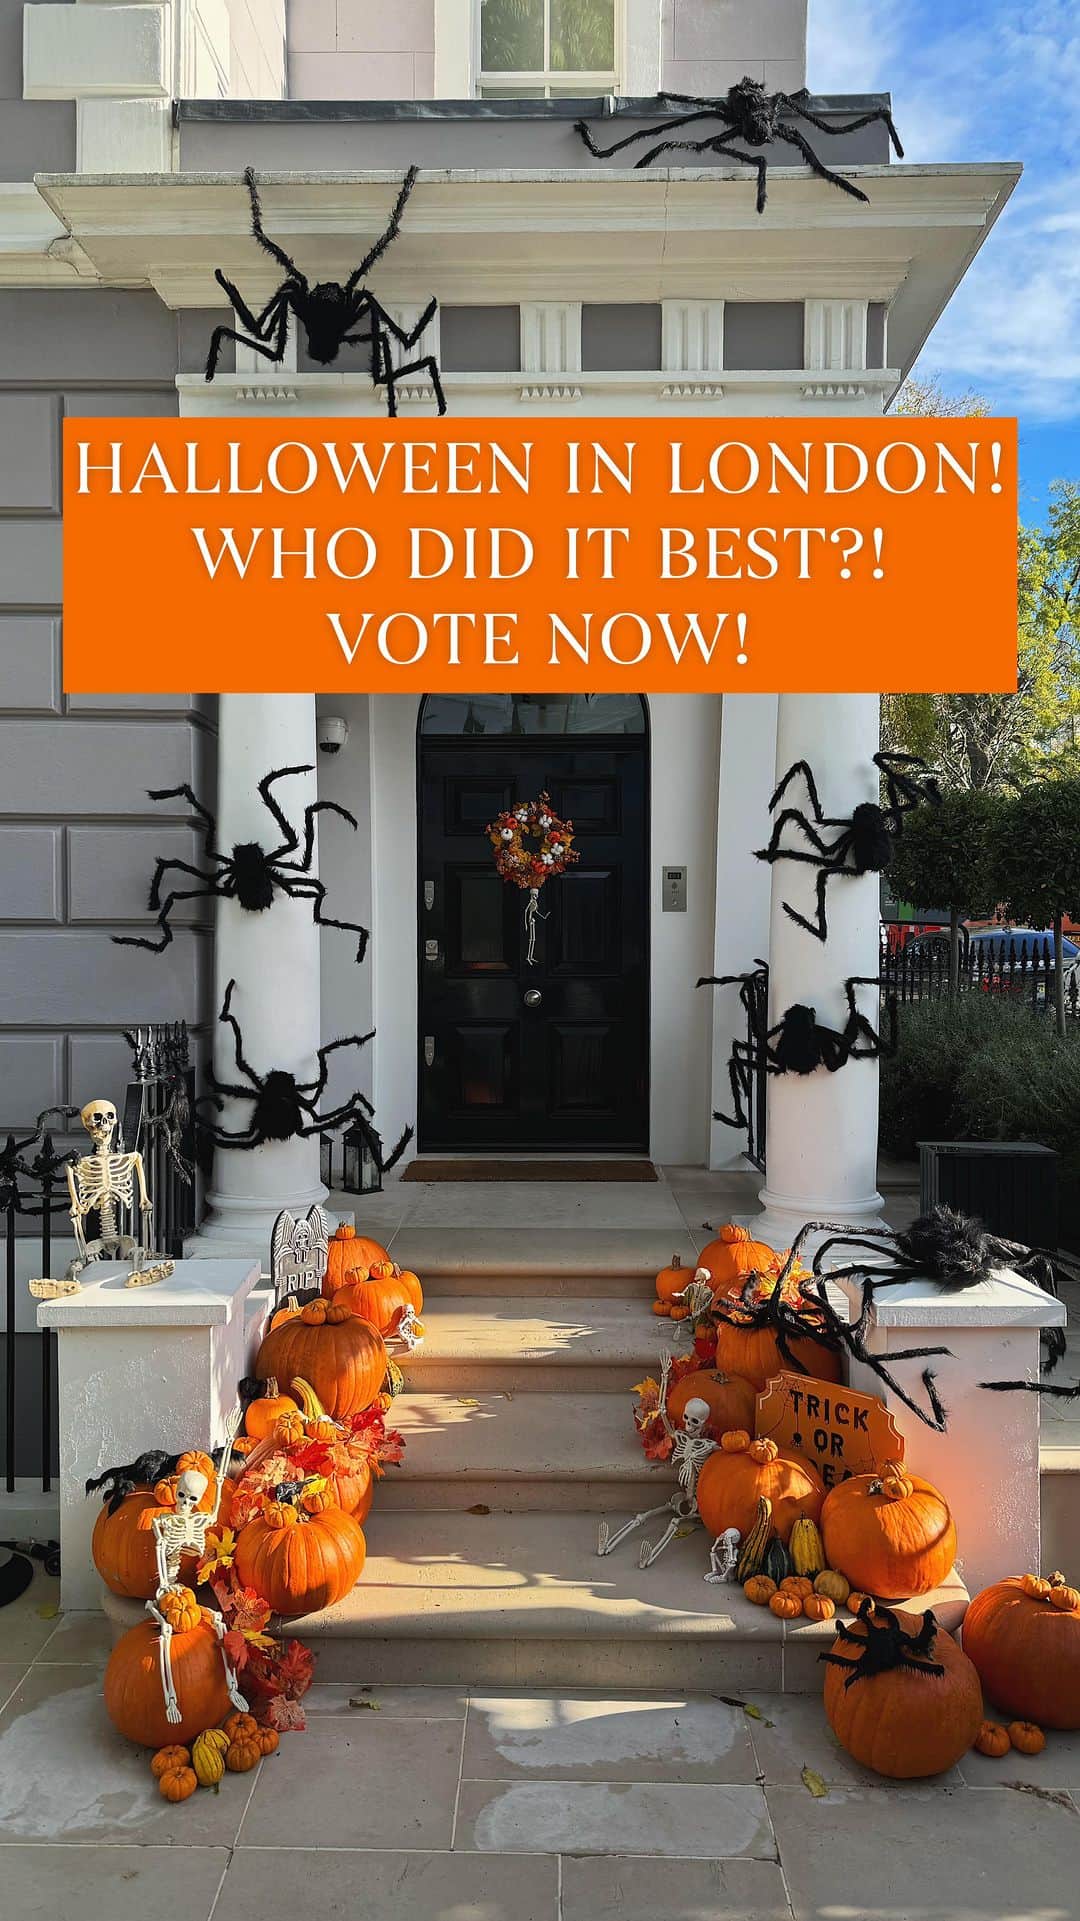 @LONDON | TAG #THISISLONDONのインスタグラム：「🎃 #Halloween in London! All these houses are in #NottingHill! 👻 BUT which house did it best?! VOTE NOW for houses 1 to 7 👇🏼👇🏼 And maybe we’ll drop off a bottle of champagne 🍾 to the house that wins! 🥂☺️❤️✨ Let’s go! 🙌🏼🙌🏼🙌🏼  🎥 @MrLondon  ___________________________________________  #thisislondon #lovelondon #london #londra #londonlife #londres #uk #visitlondon #british #🇬🇧 #whattodoinlondon #londonreviewed #halloweeninlondon」